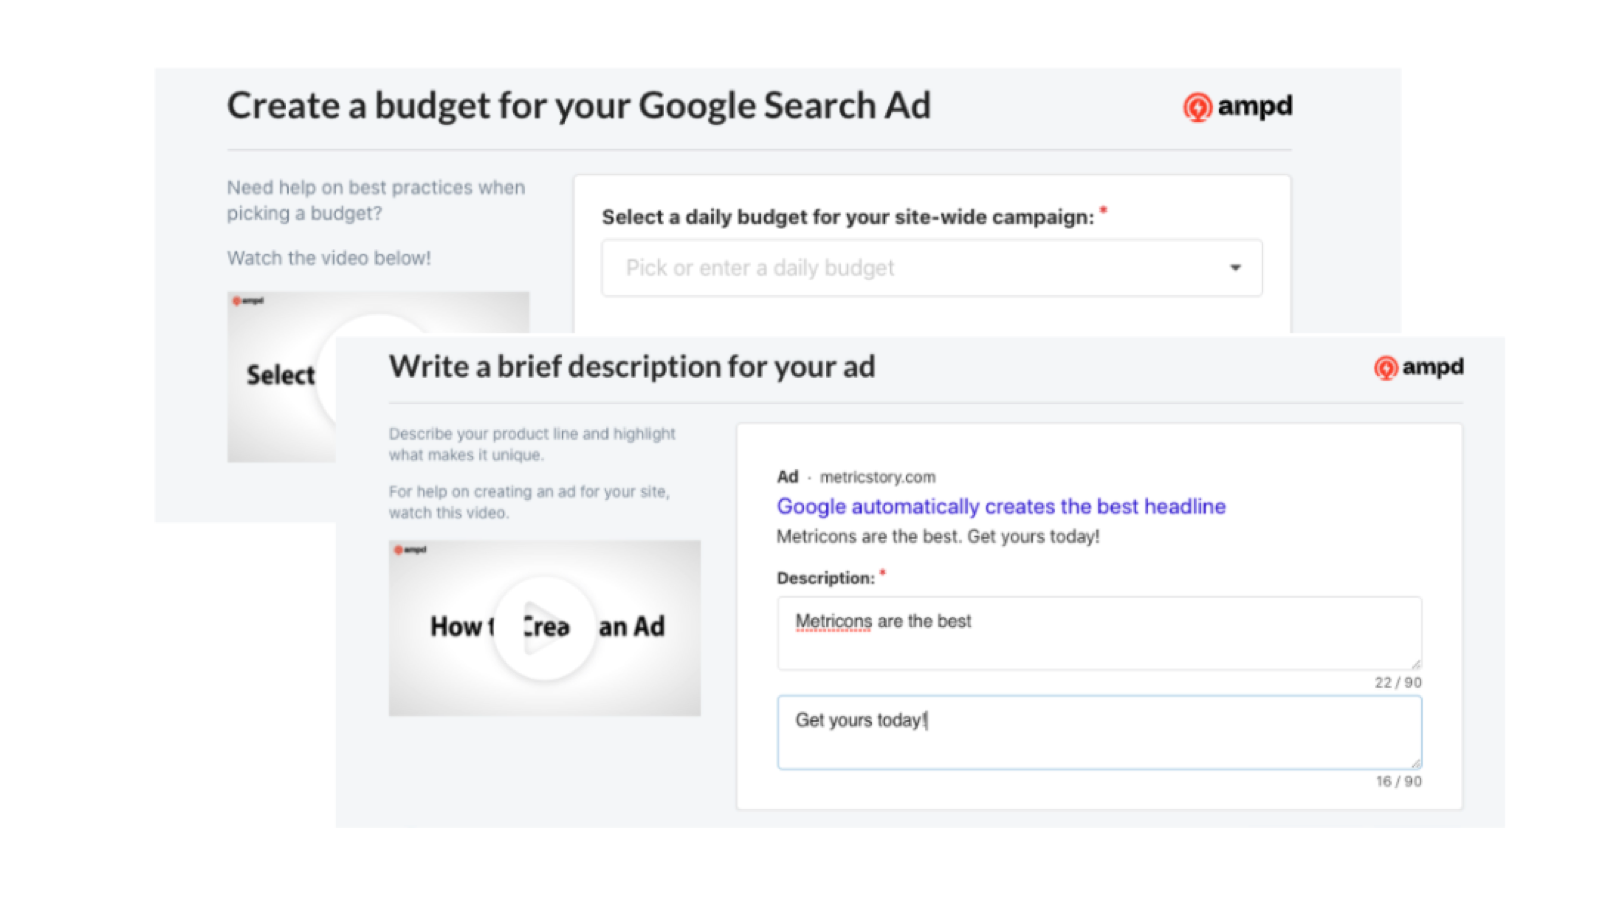 The fastest and simplest way to launch effective ads